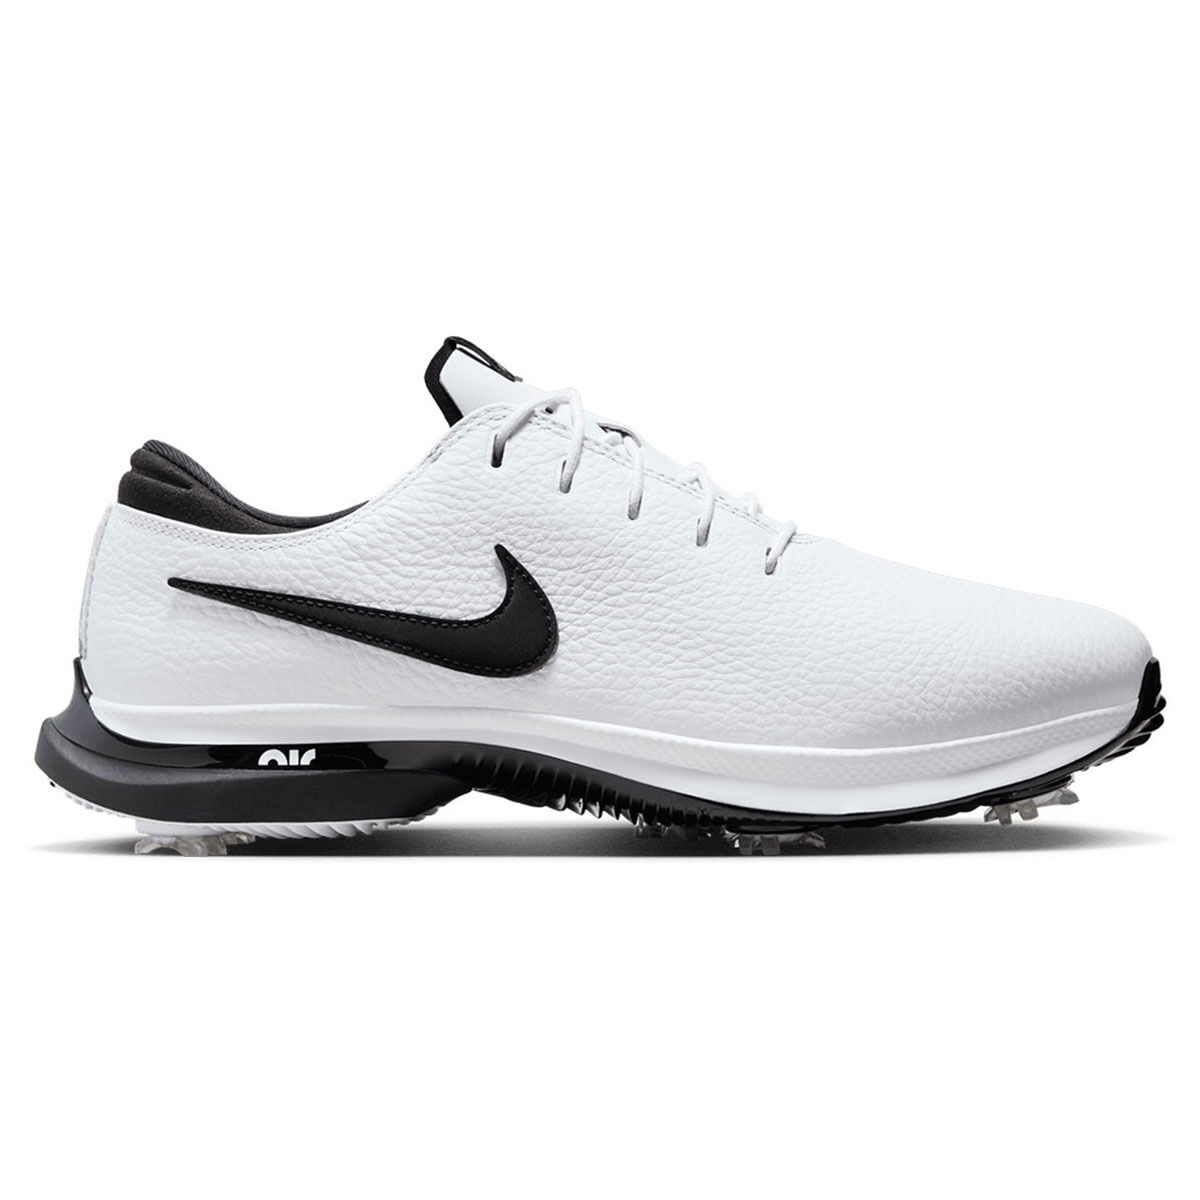 Nike Air Zoom Victory Tour 3 Waterproof Spiked Golf Shoes, Mens, White/black, 8 | American Golf